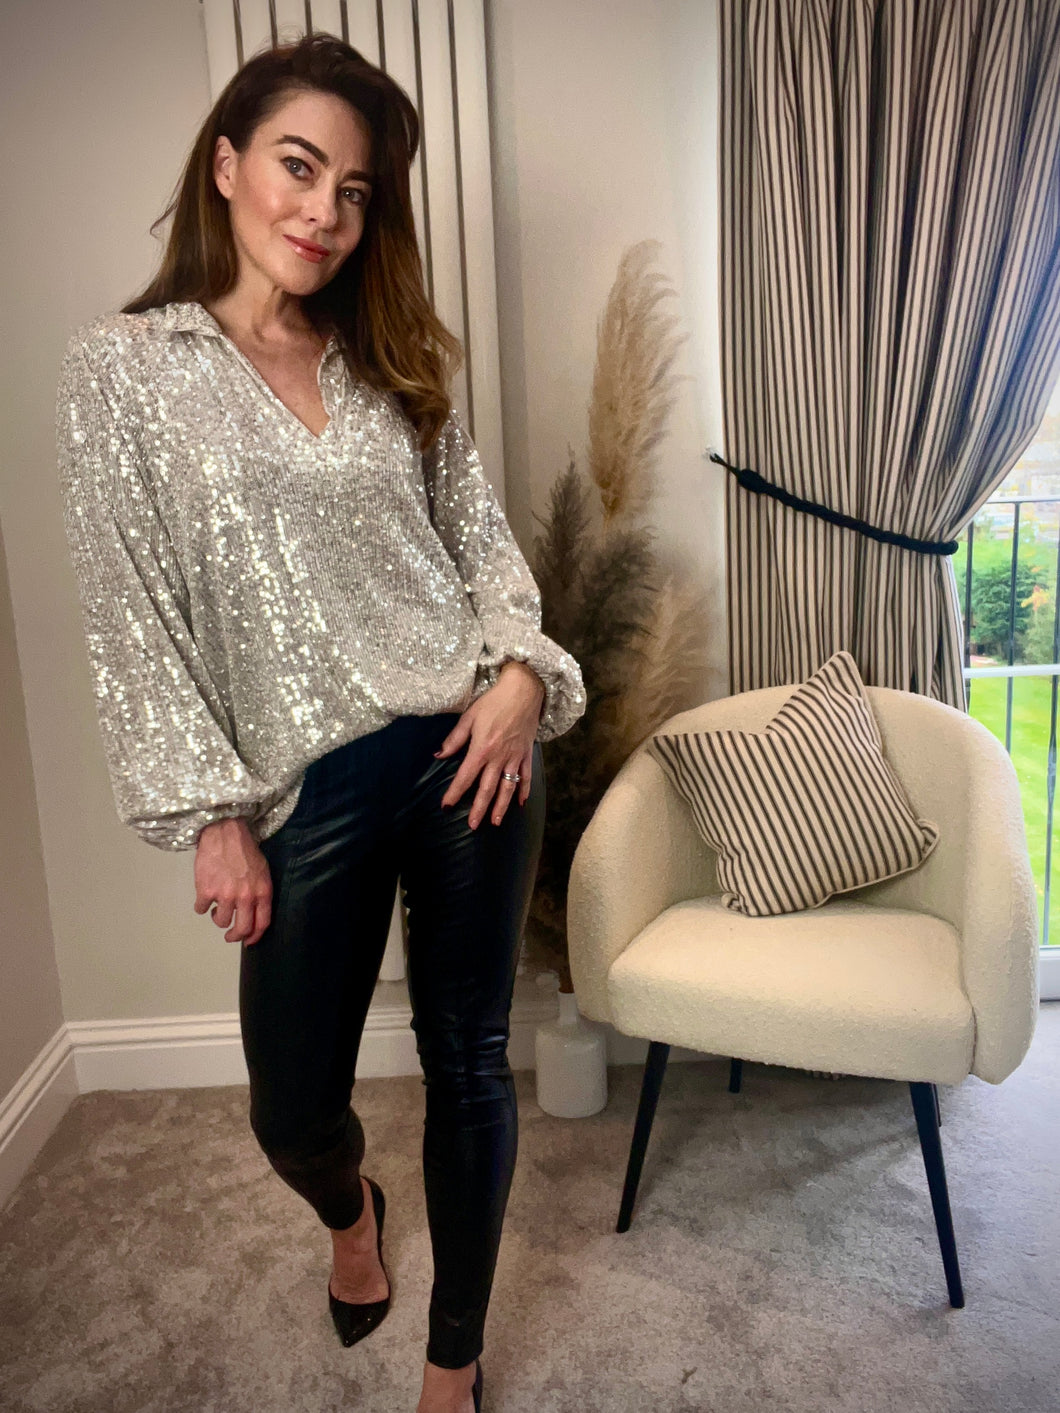 GOLD/SILVER SEQUIN BLOUSE